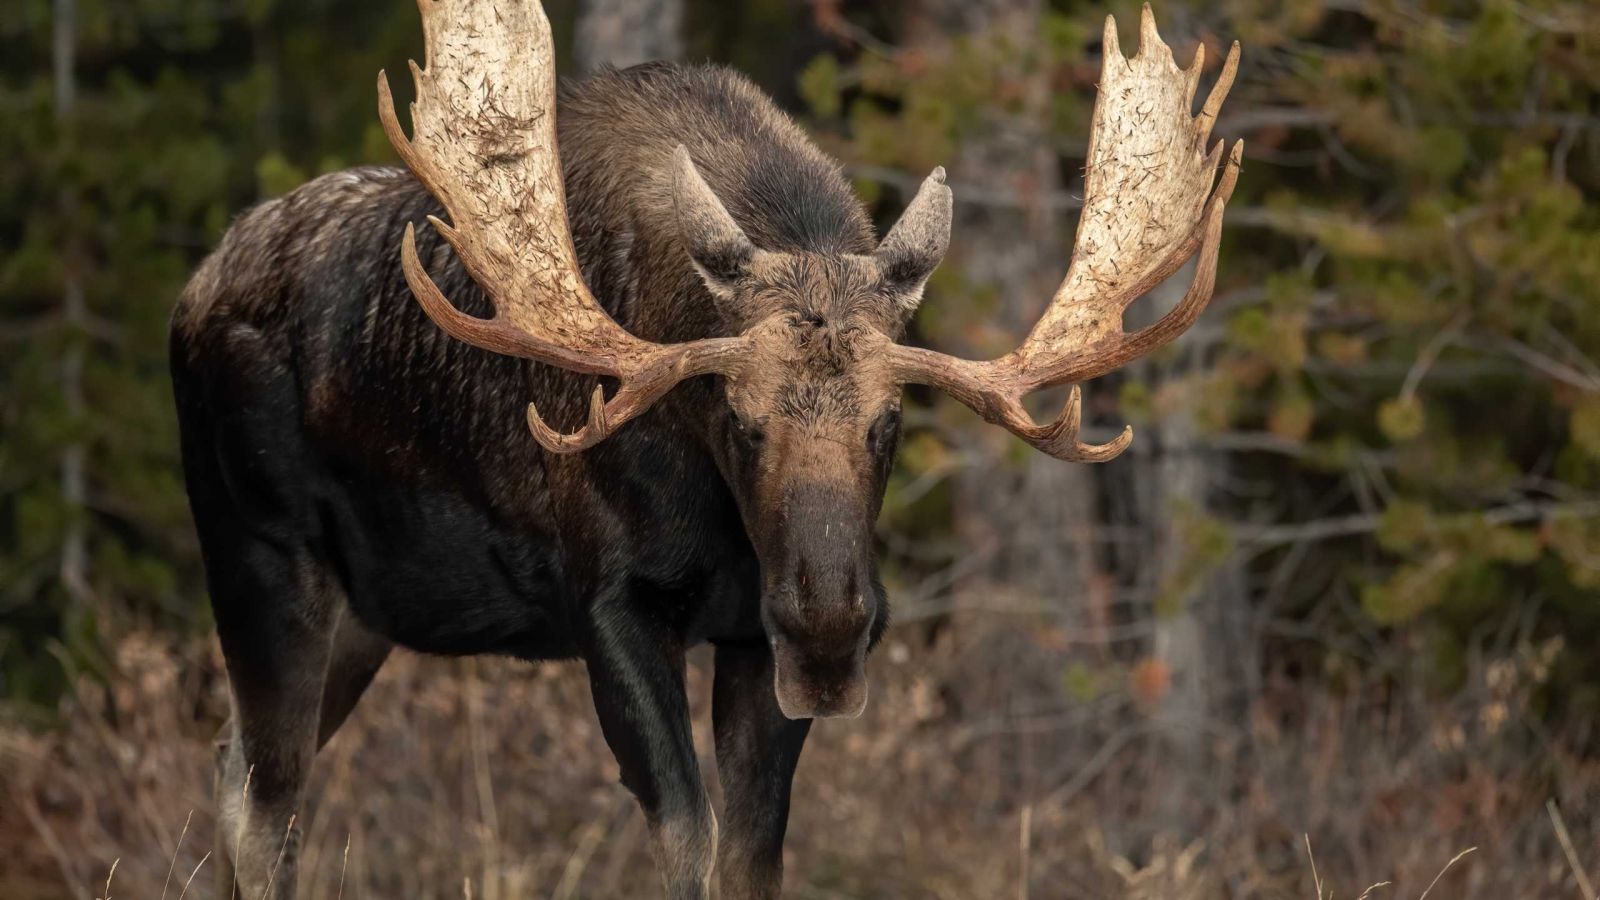 Moose showing antlers in the forest